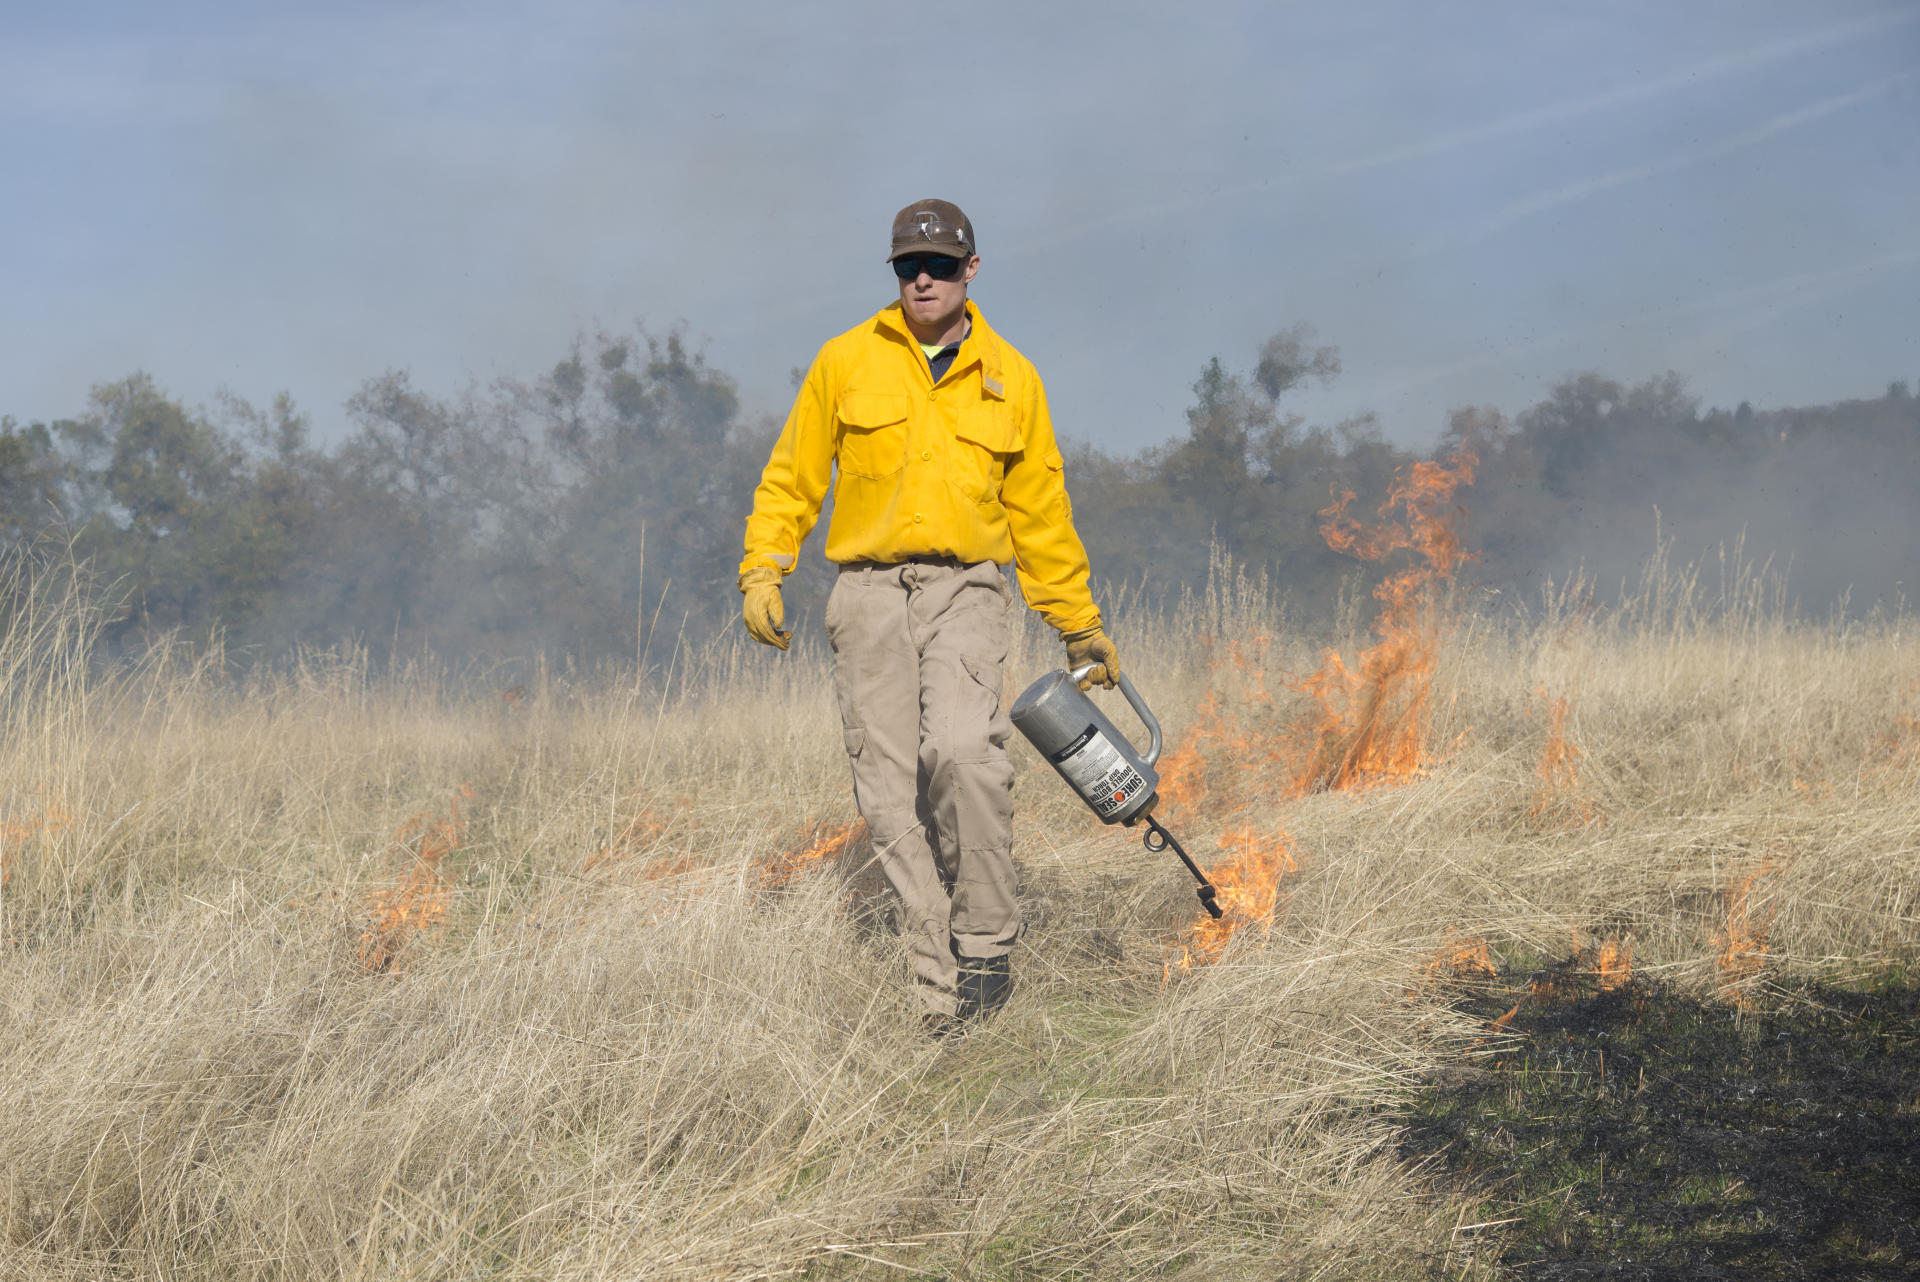 A student walks with a drip torch lighting off fire in a dry field.